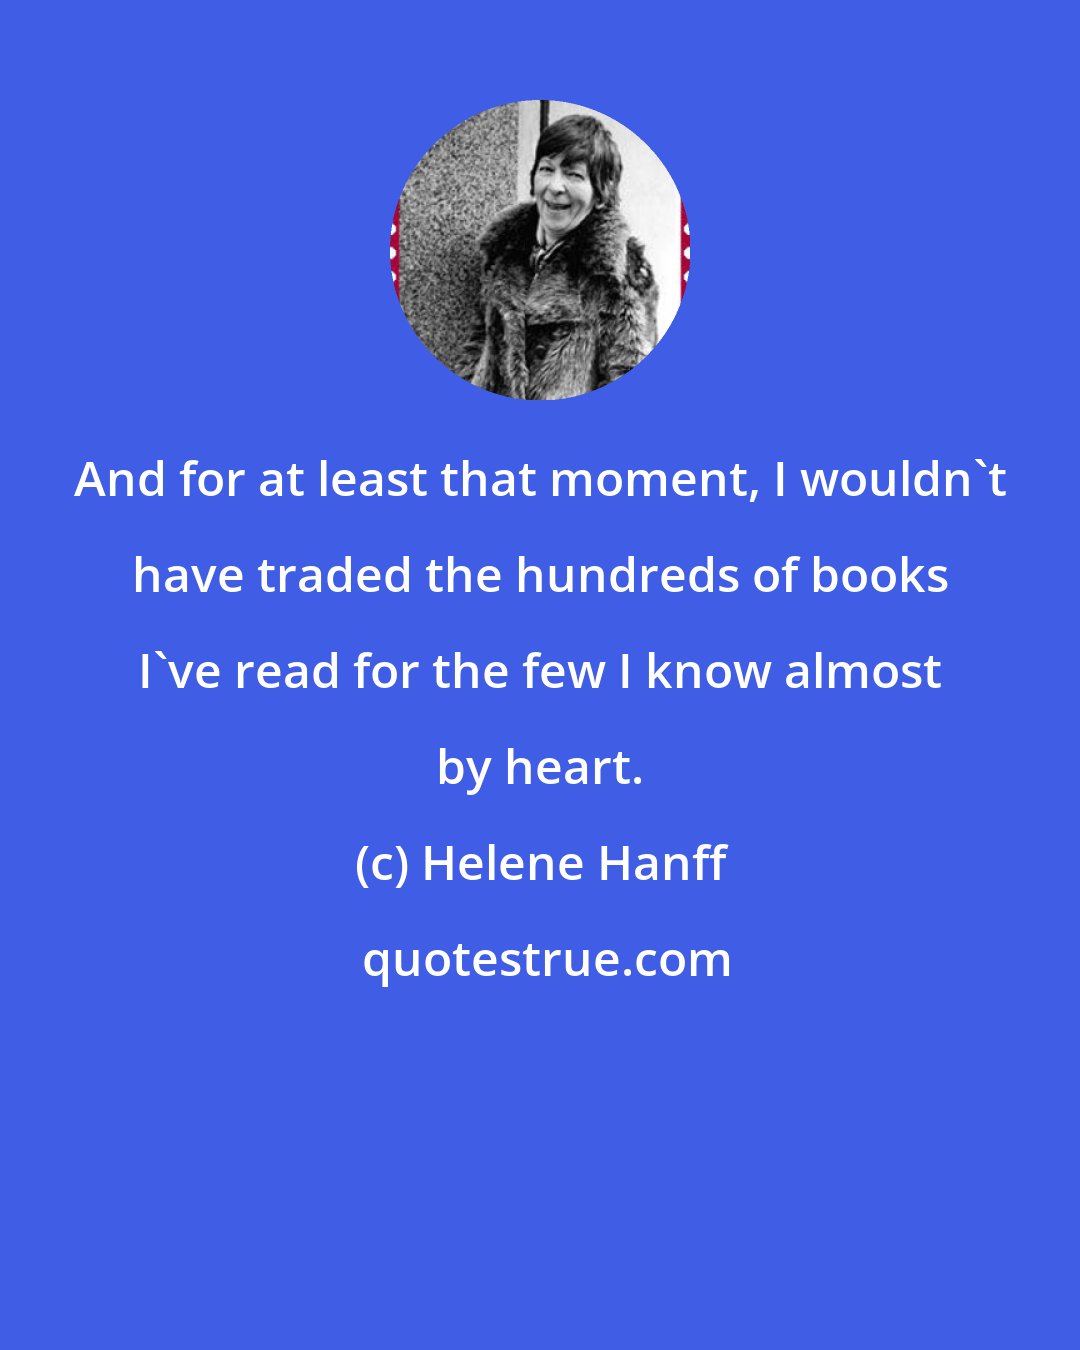 Helene Hanff: And for at least that moment, I wouldn't have traded the hundreds of books I've read for the few I know almost by heart.